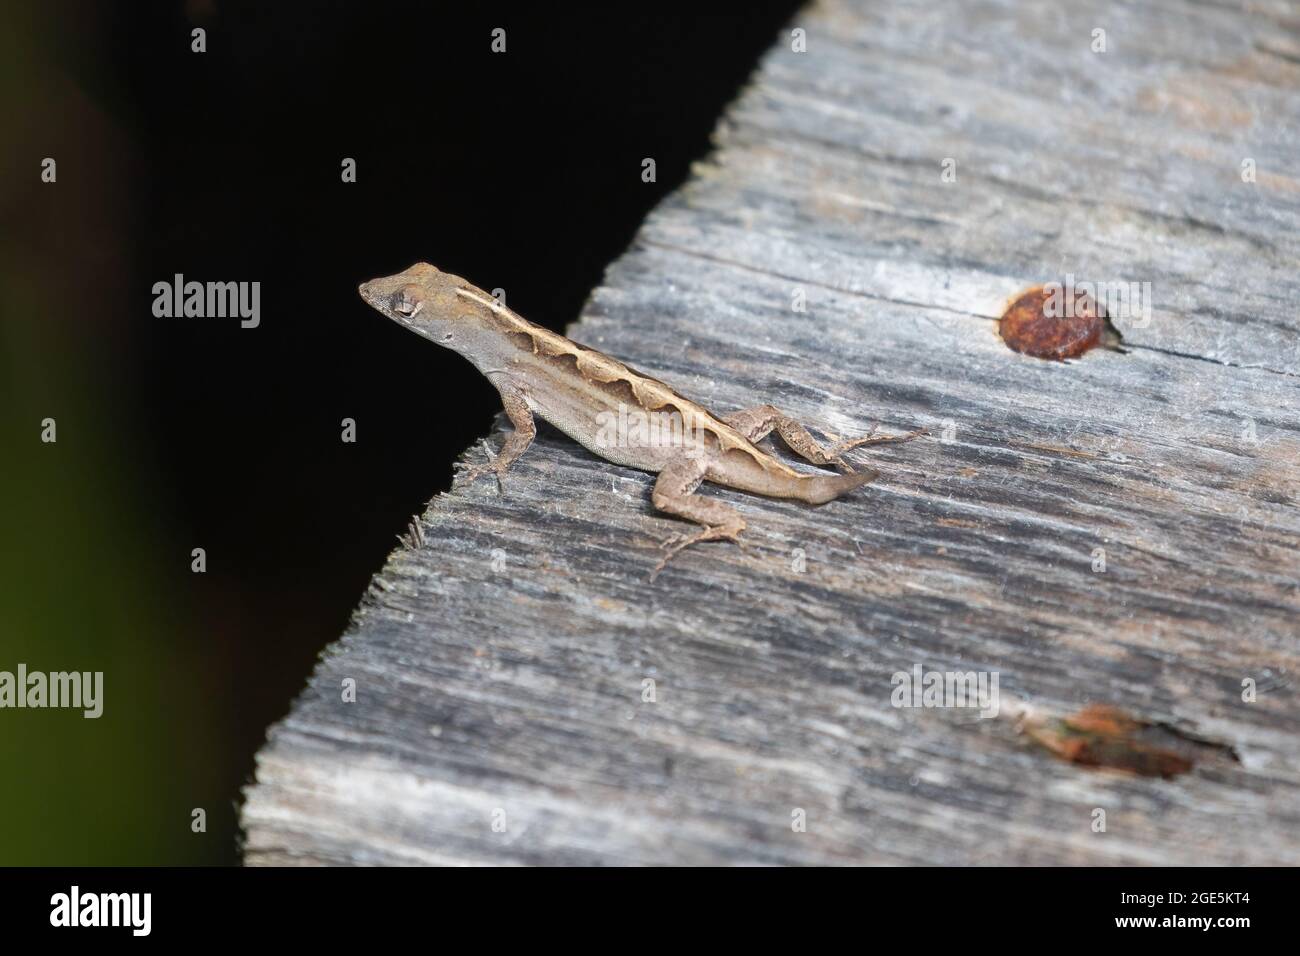 A brown anole (Anolis sagrei) without a tail standing on a weathered wooden deck. Stock Photo